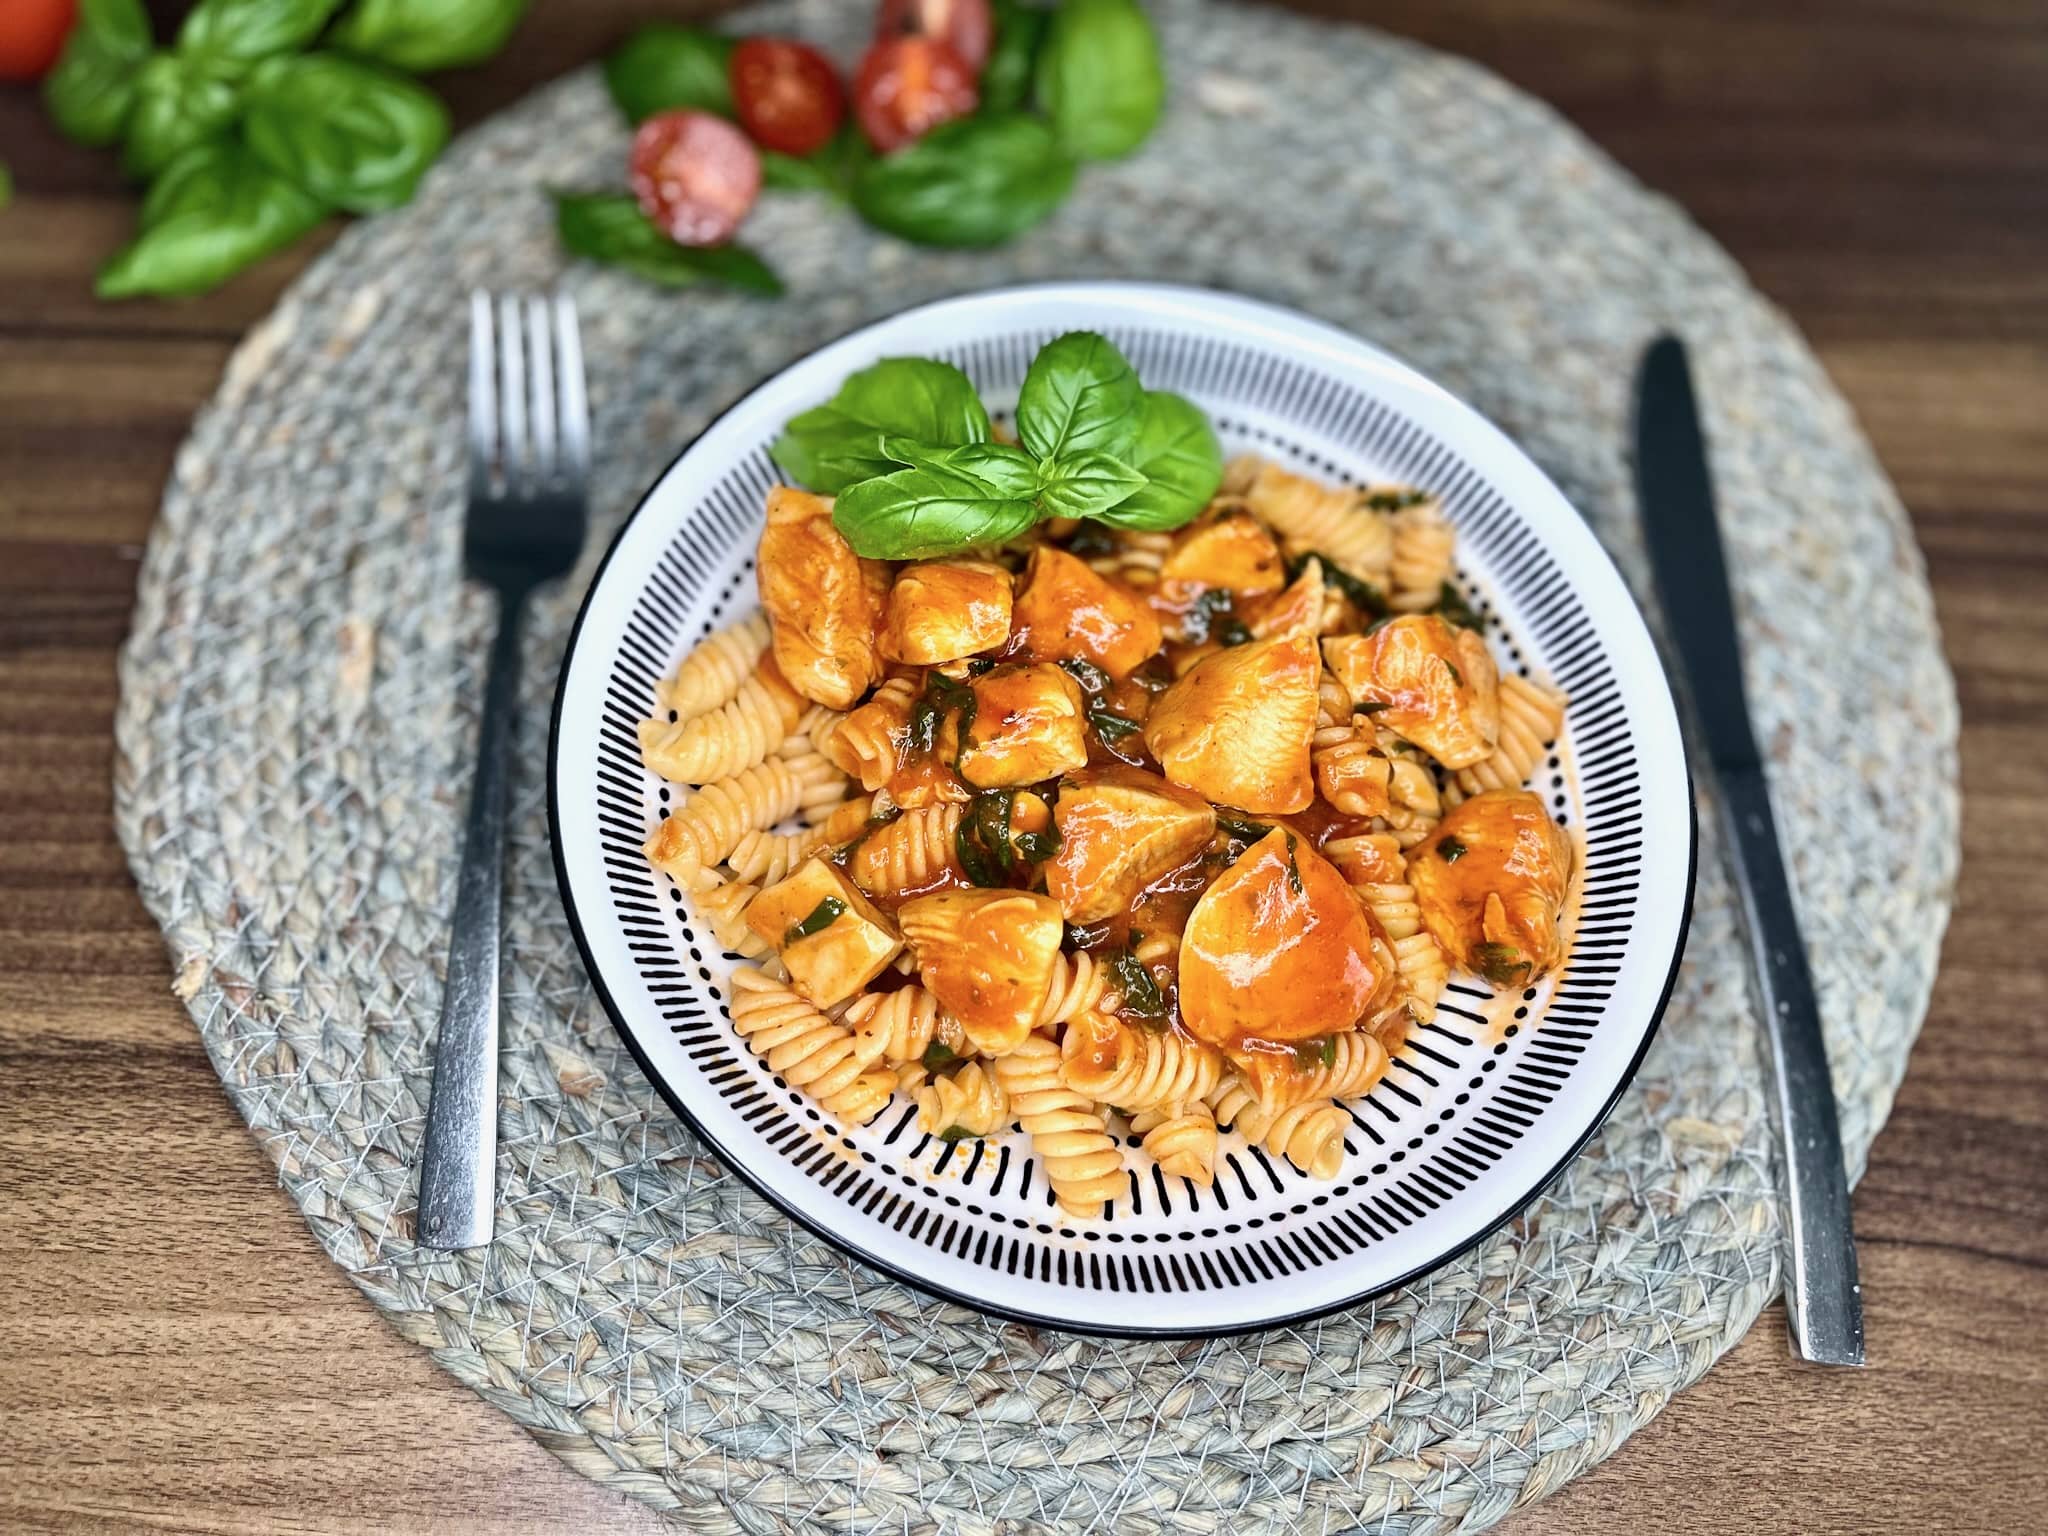 Tomato and Basil Chicken is elegantly served with pasta in a bowl